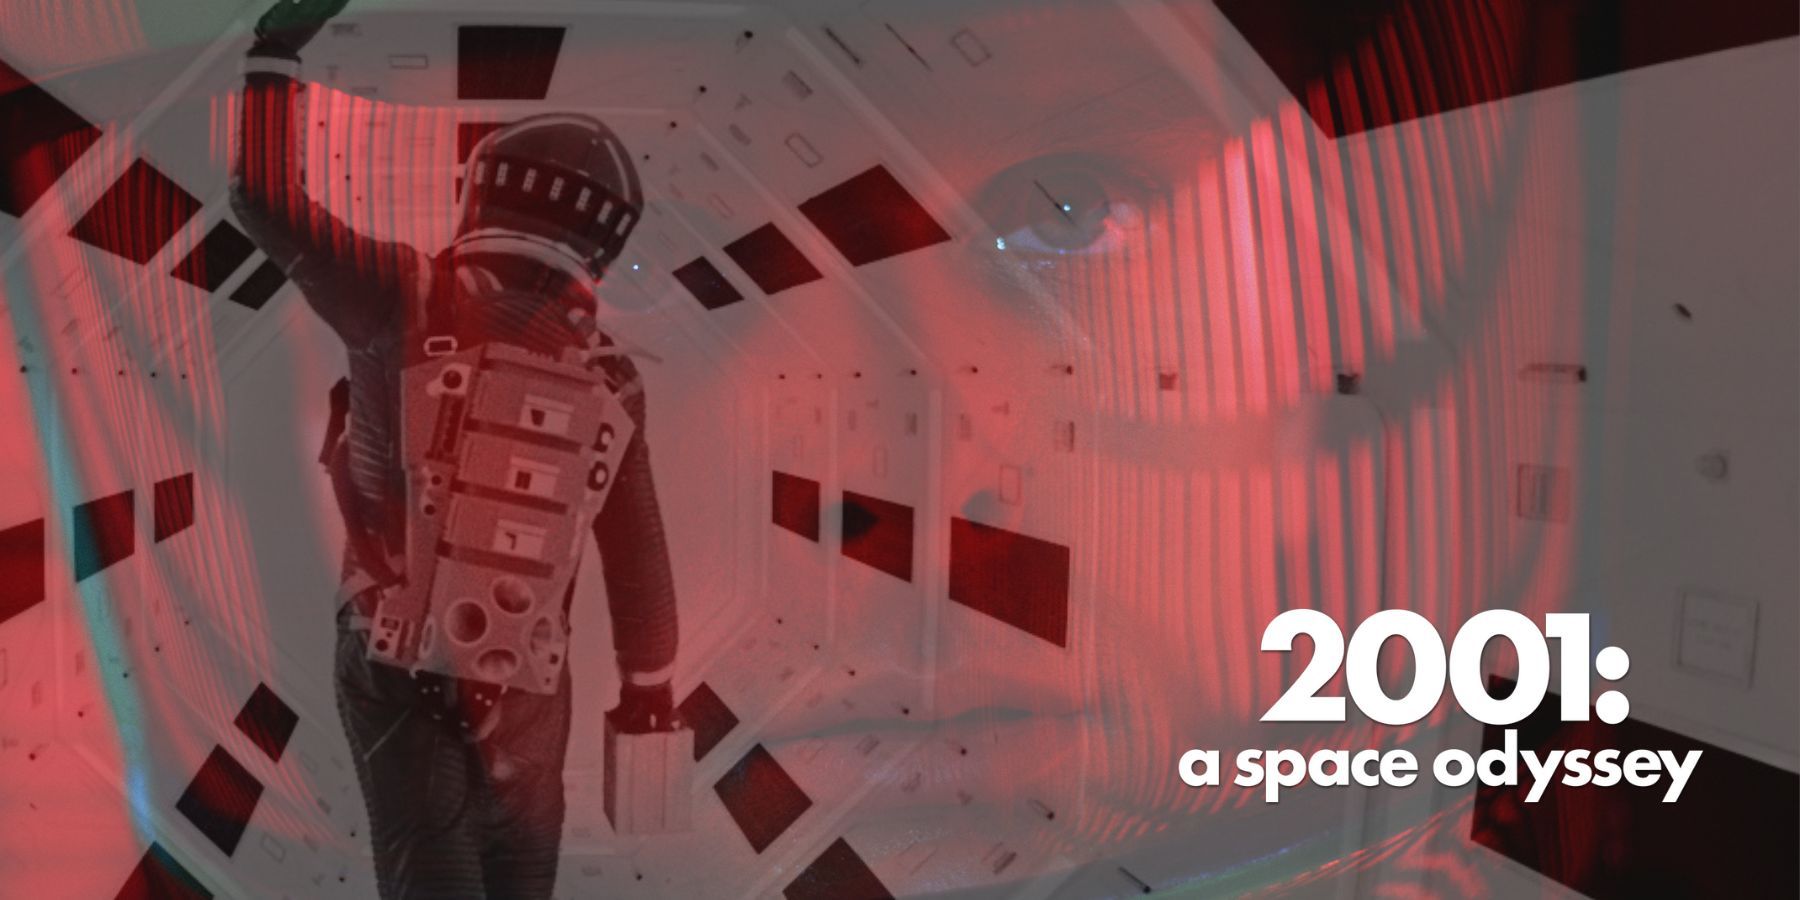 Why Is 2001: A Space Odyssey So Important? The Film's Influence, Explained